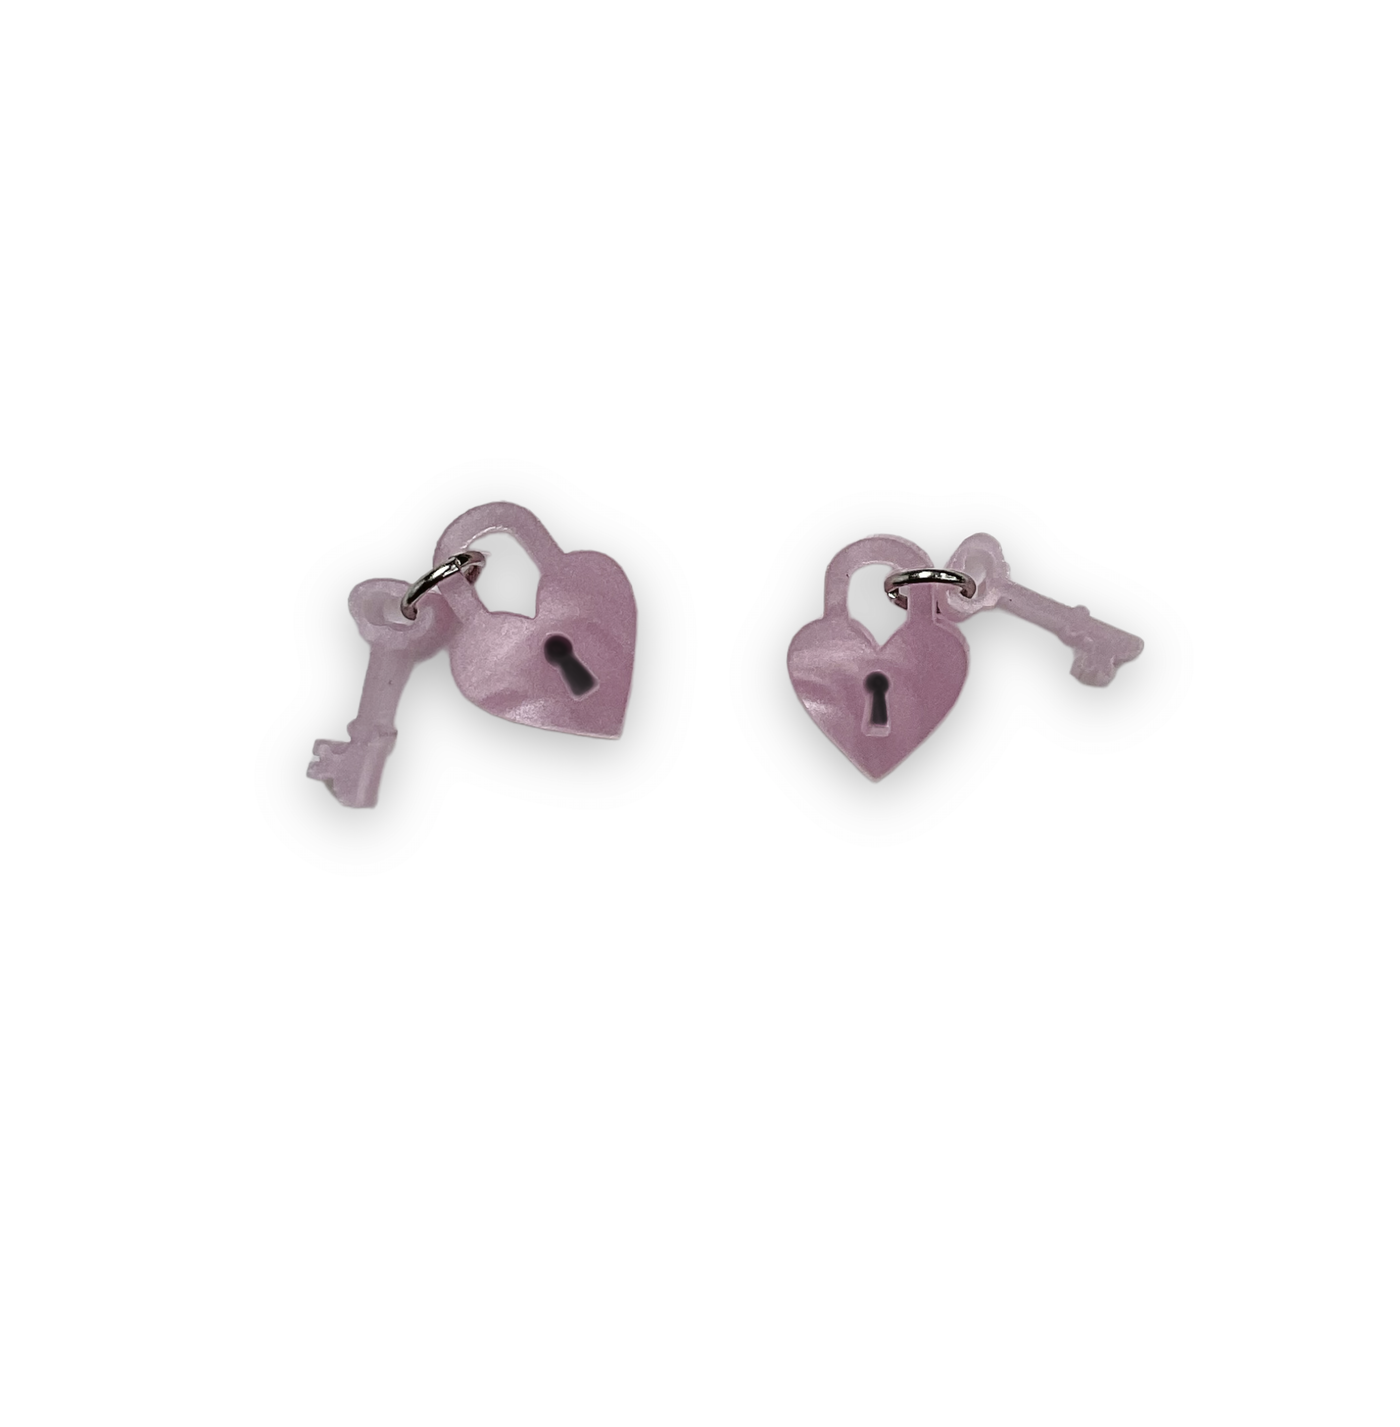 SALE! Locky For You Earrings in Pearl Pink